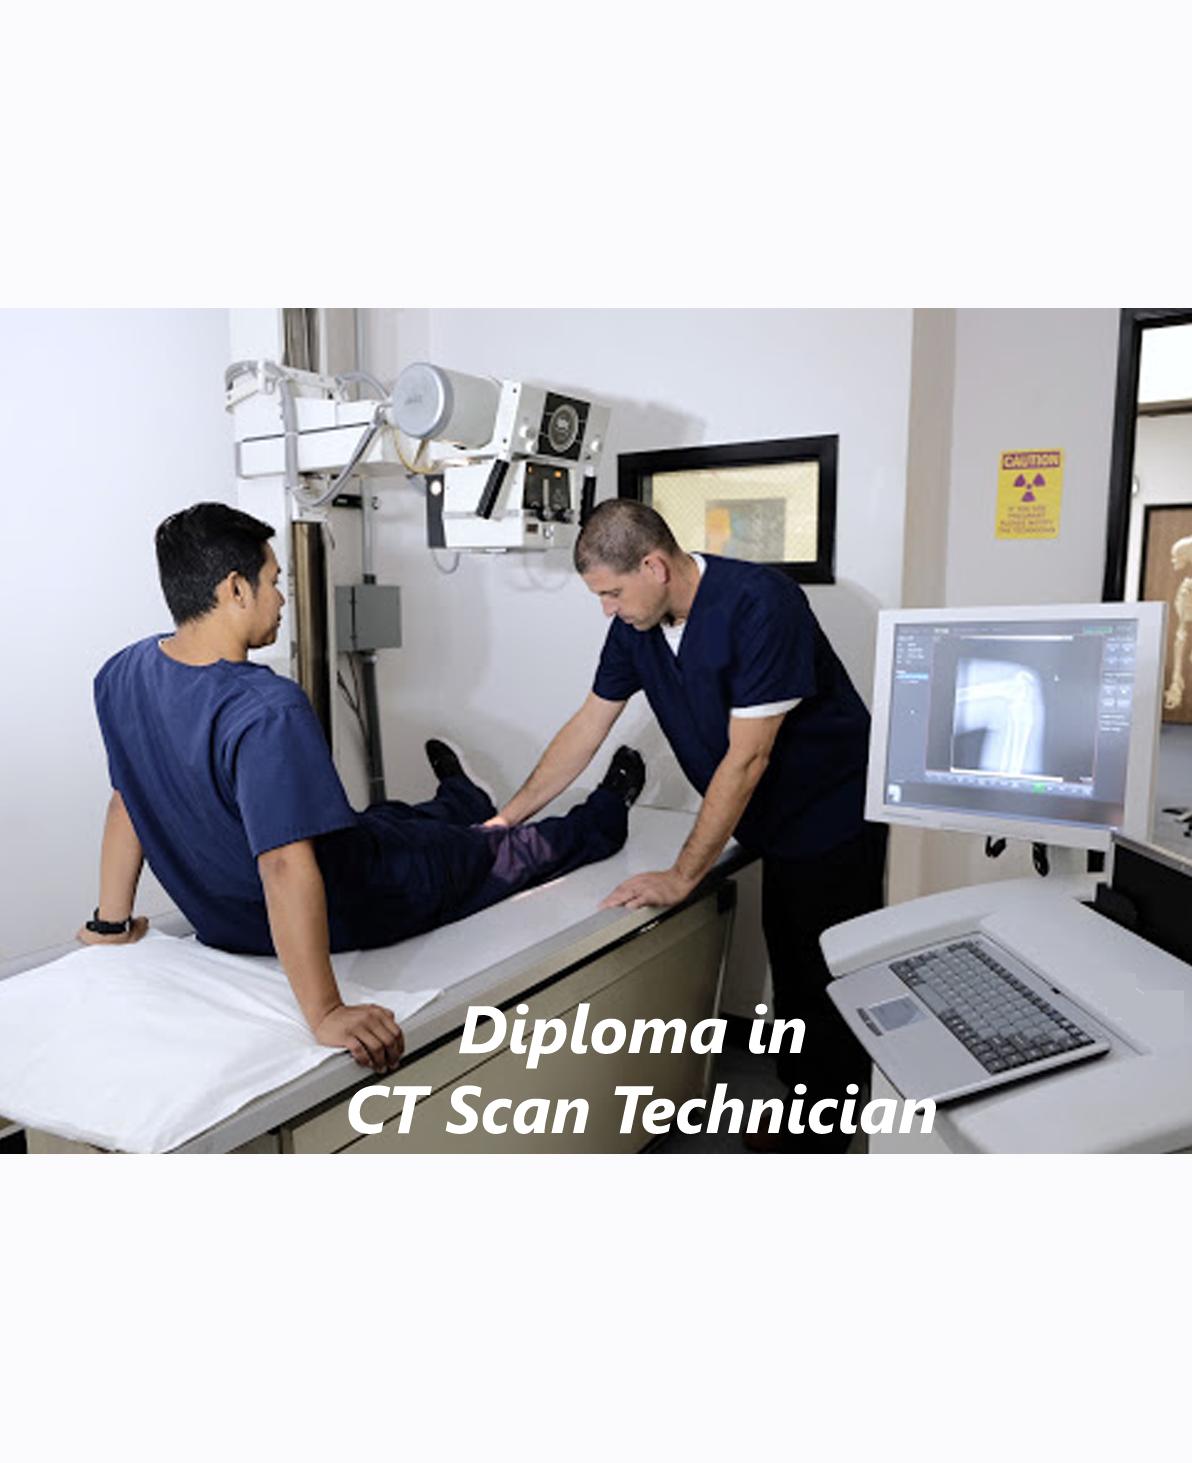 Diploma in CT Scan Technician